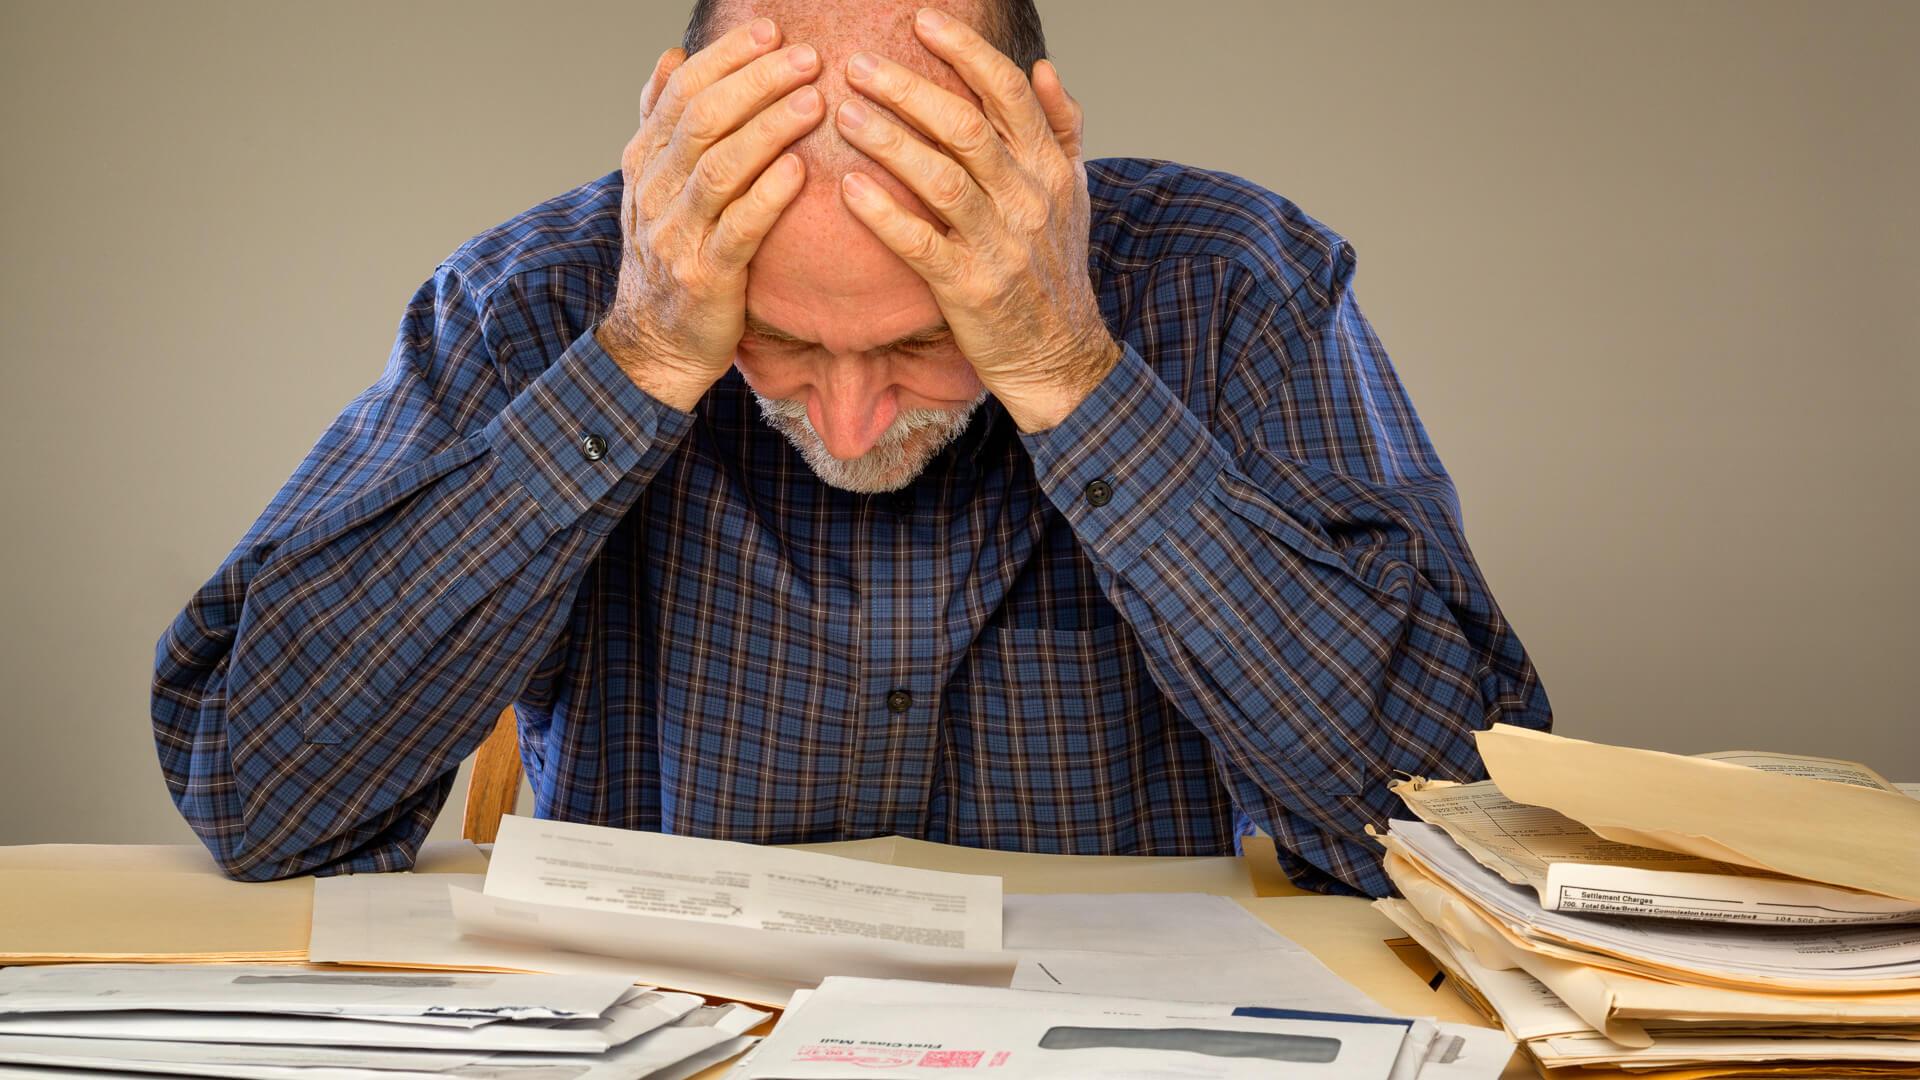 5 Fastest and Most Common Ways You Can Ruin Your Retirement Plan